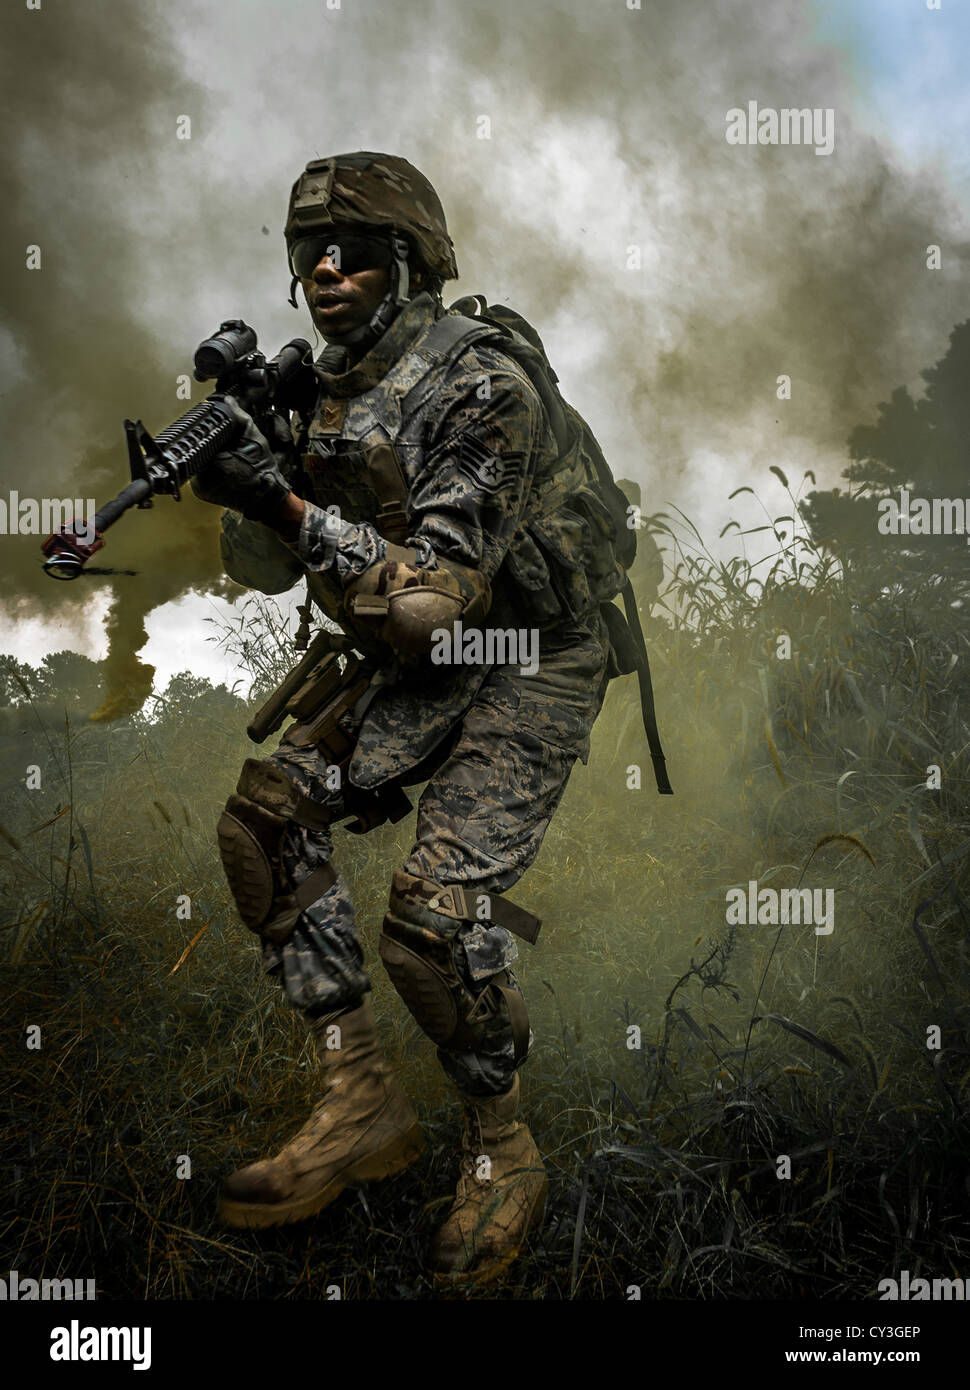 A US Army soldier participates in combat skills training September 23, 2012 at Ft. Dix, New Jersey for an upcoming deployment. Stock Photo